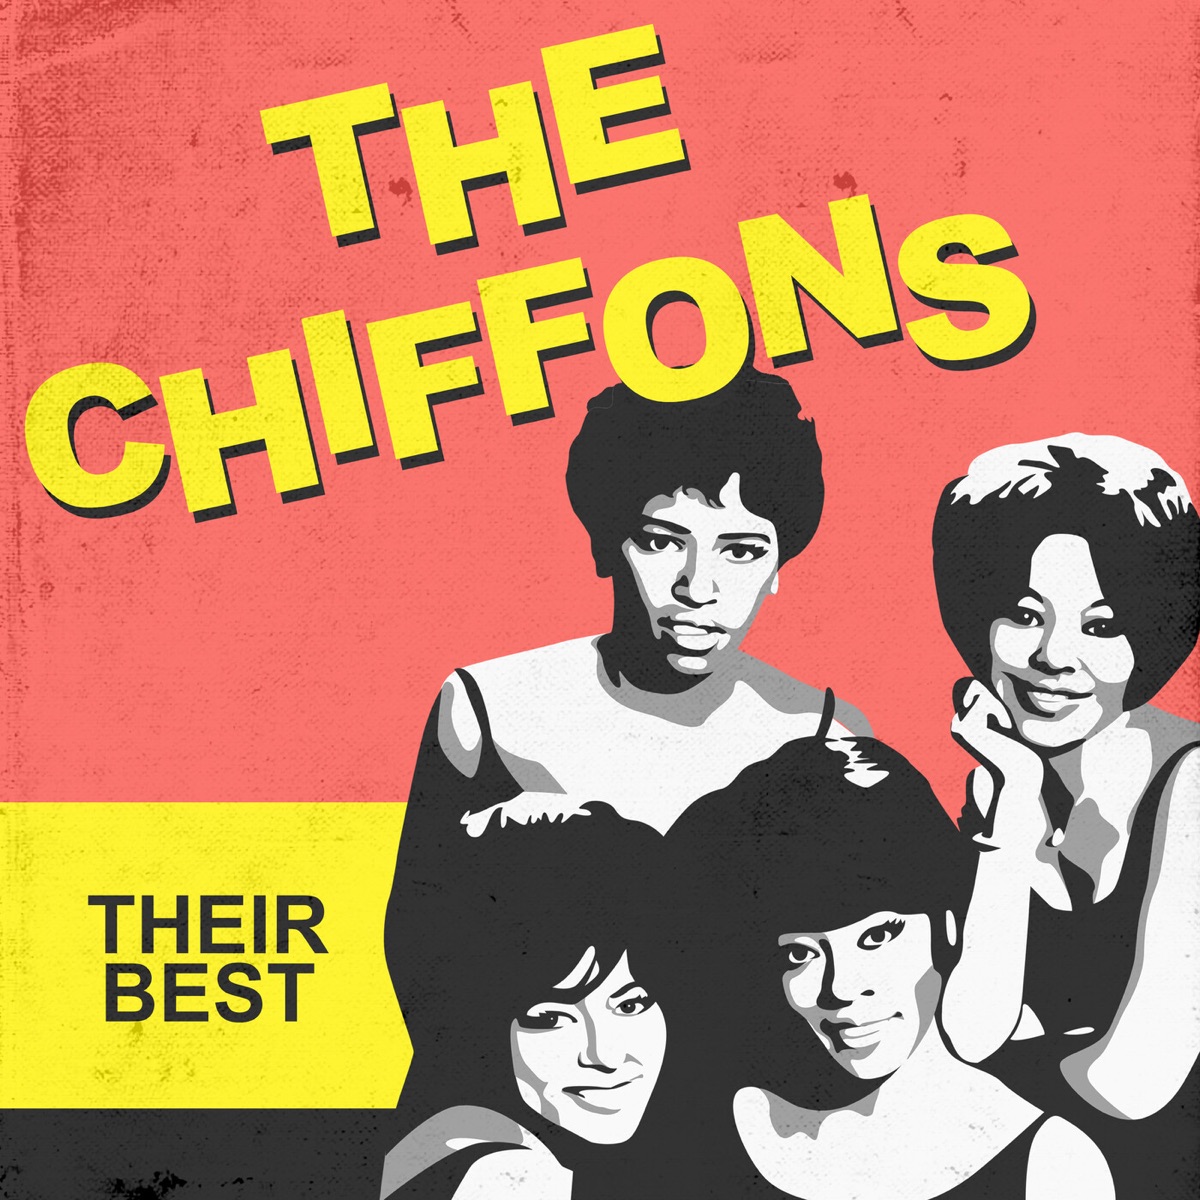 The Best of the Chiffons - Album by The Chiffons - Apple Music